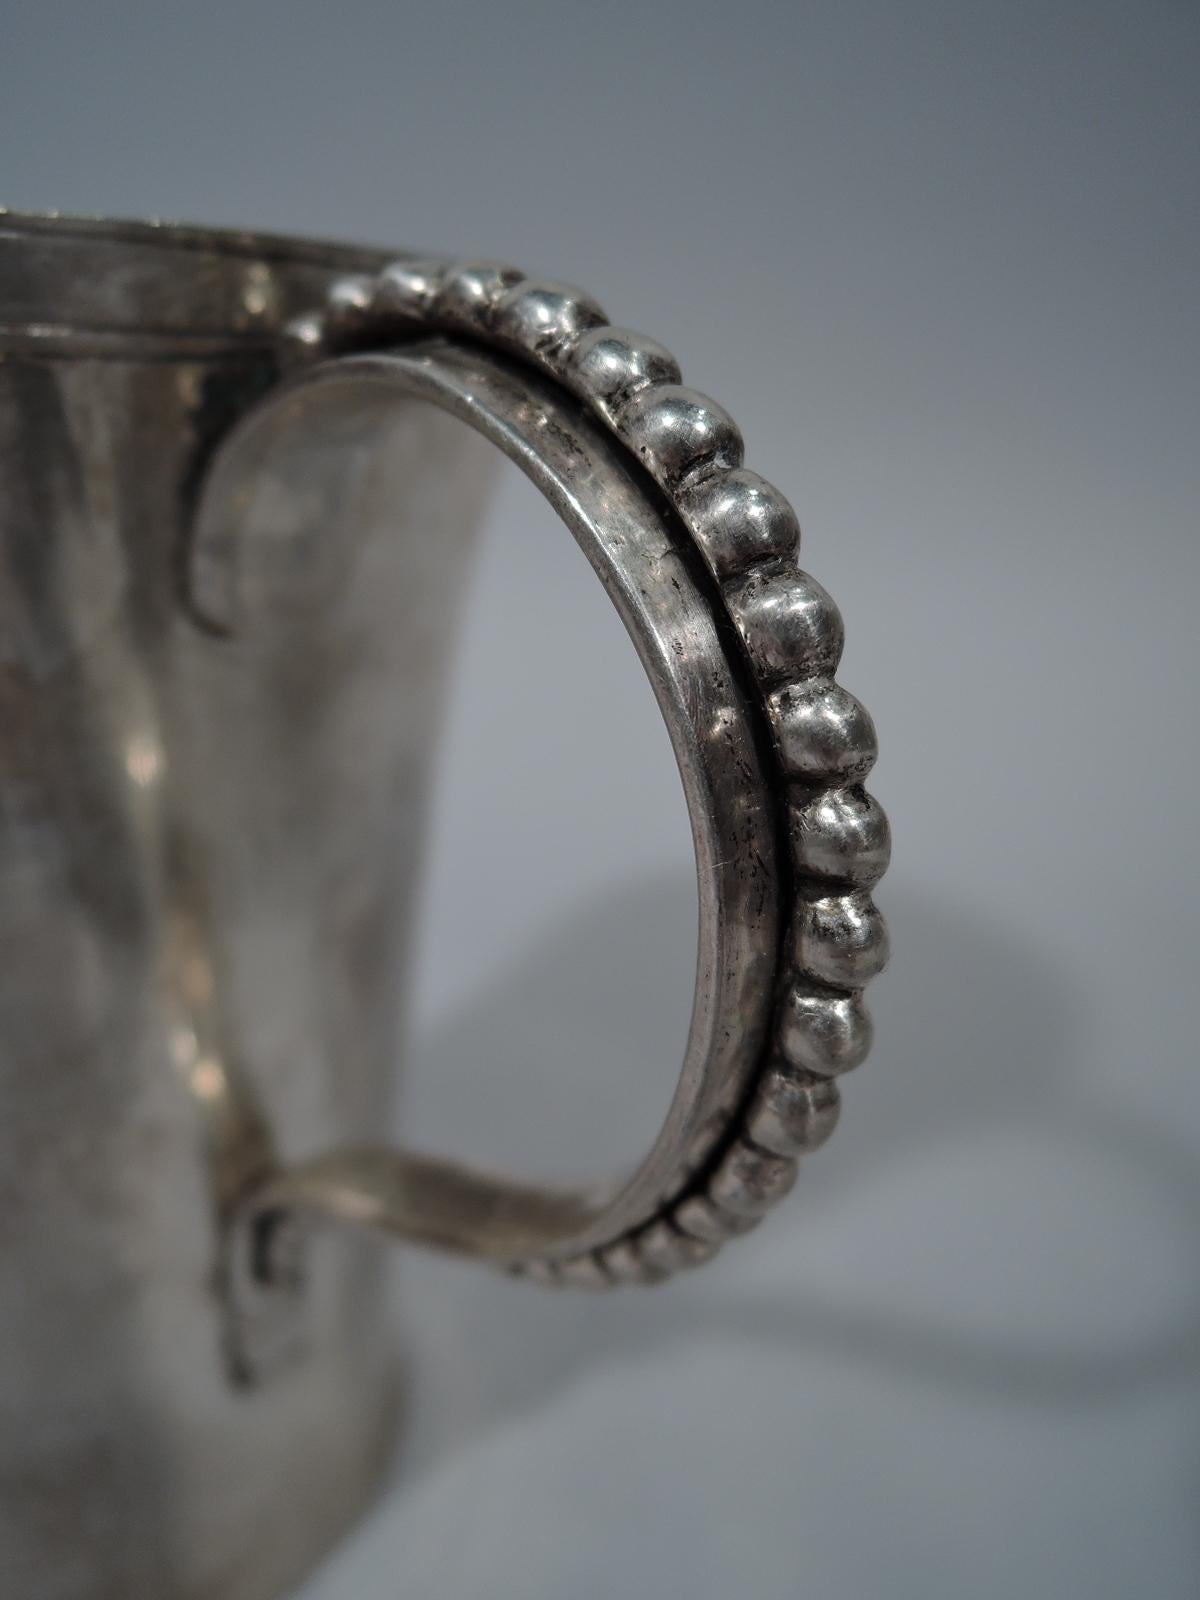 19th Century Tall and Heavy South American Silver Mug with Beaded Handle